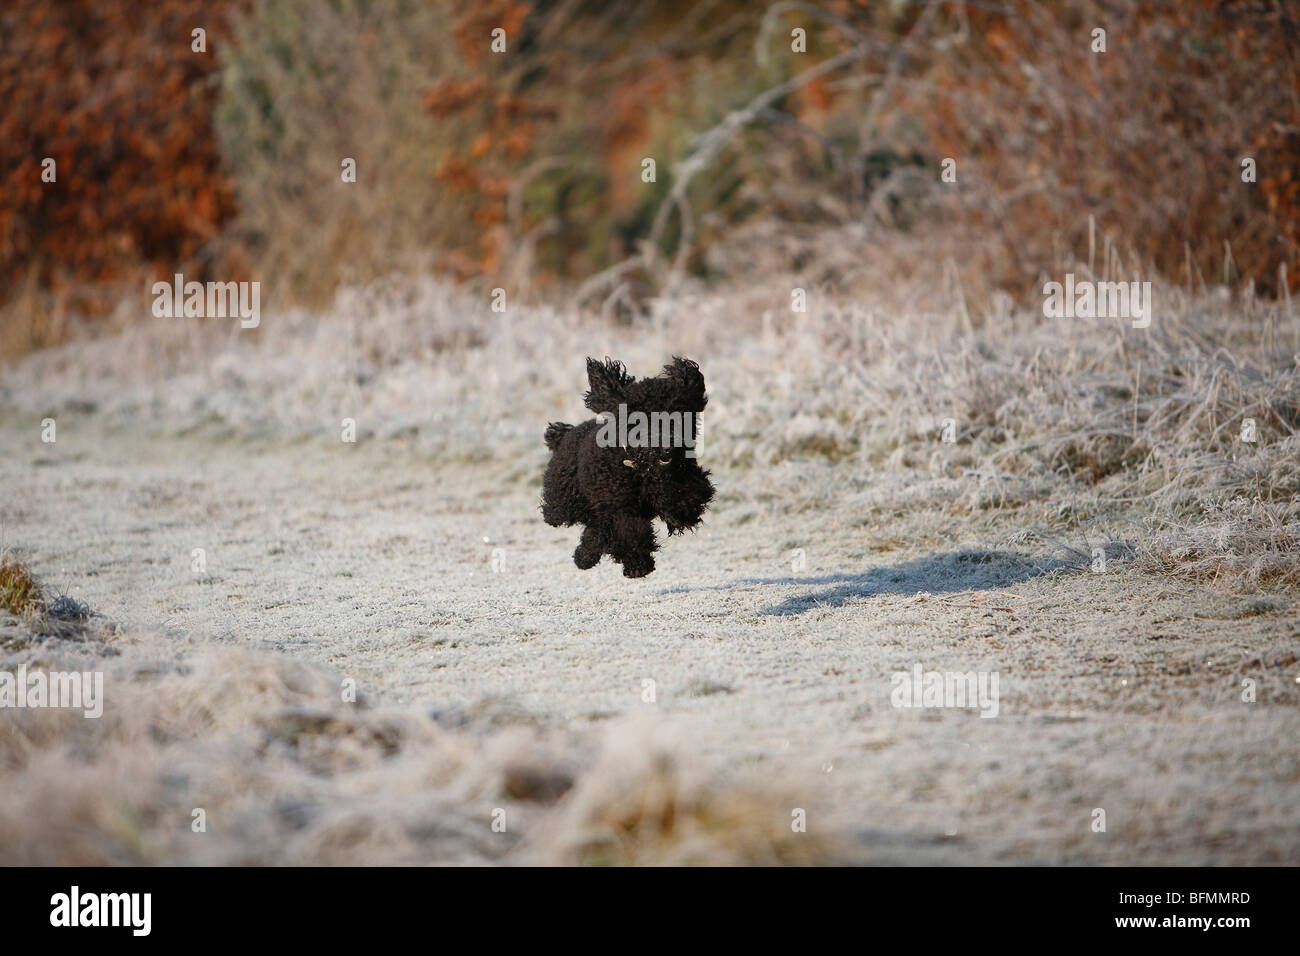 Miniature Poodle (Canis lupus f. familiaris), running along a field path covered with hoar frost, snap-shot with all legs in th Stock Photo